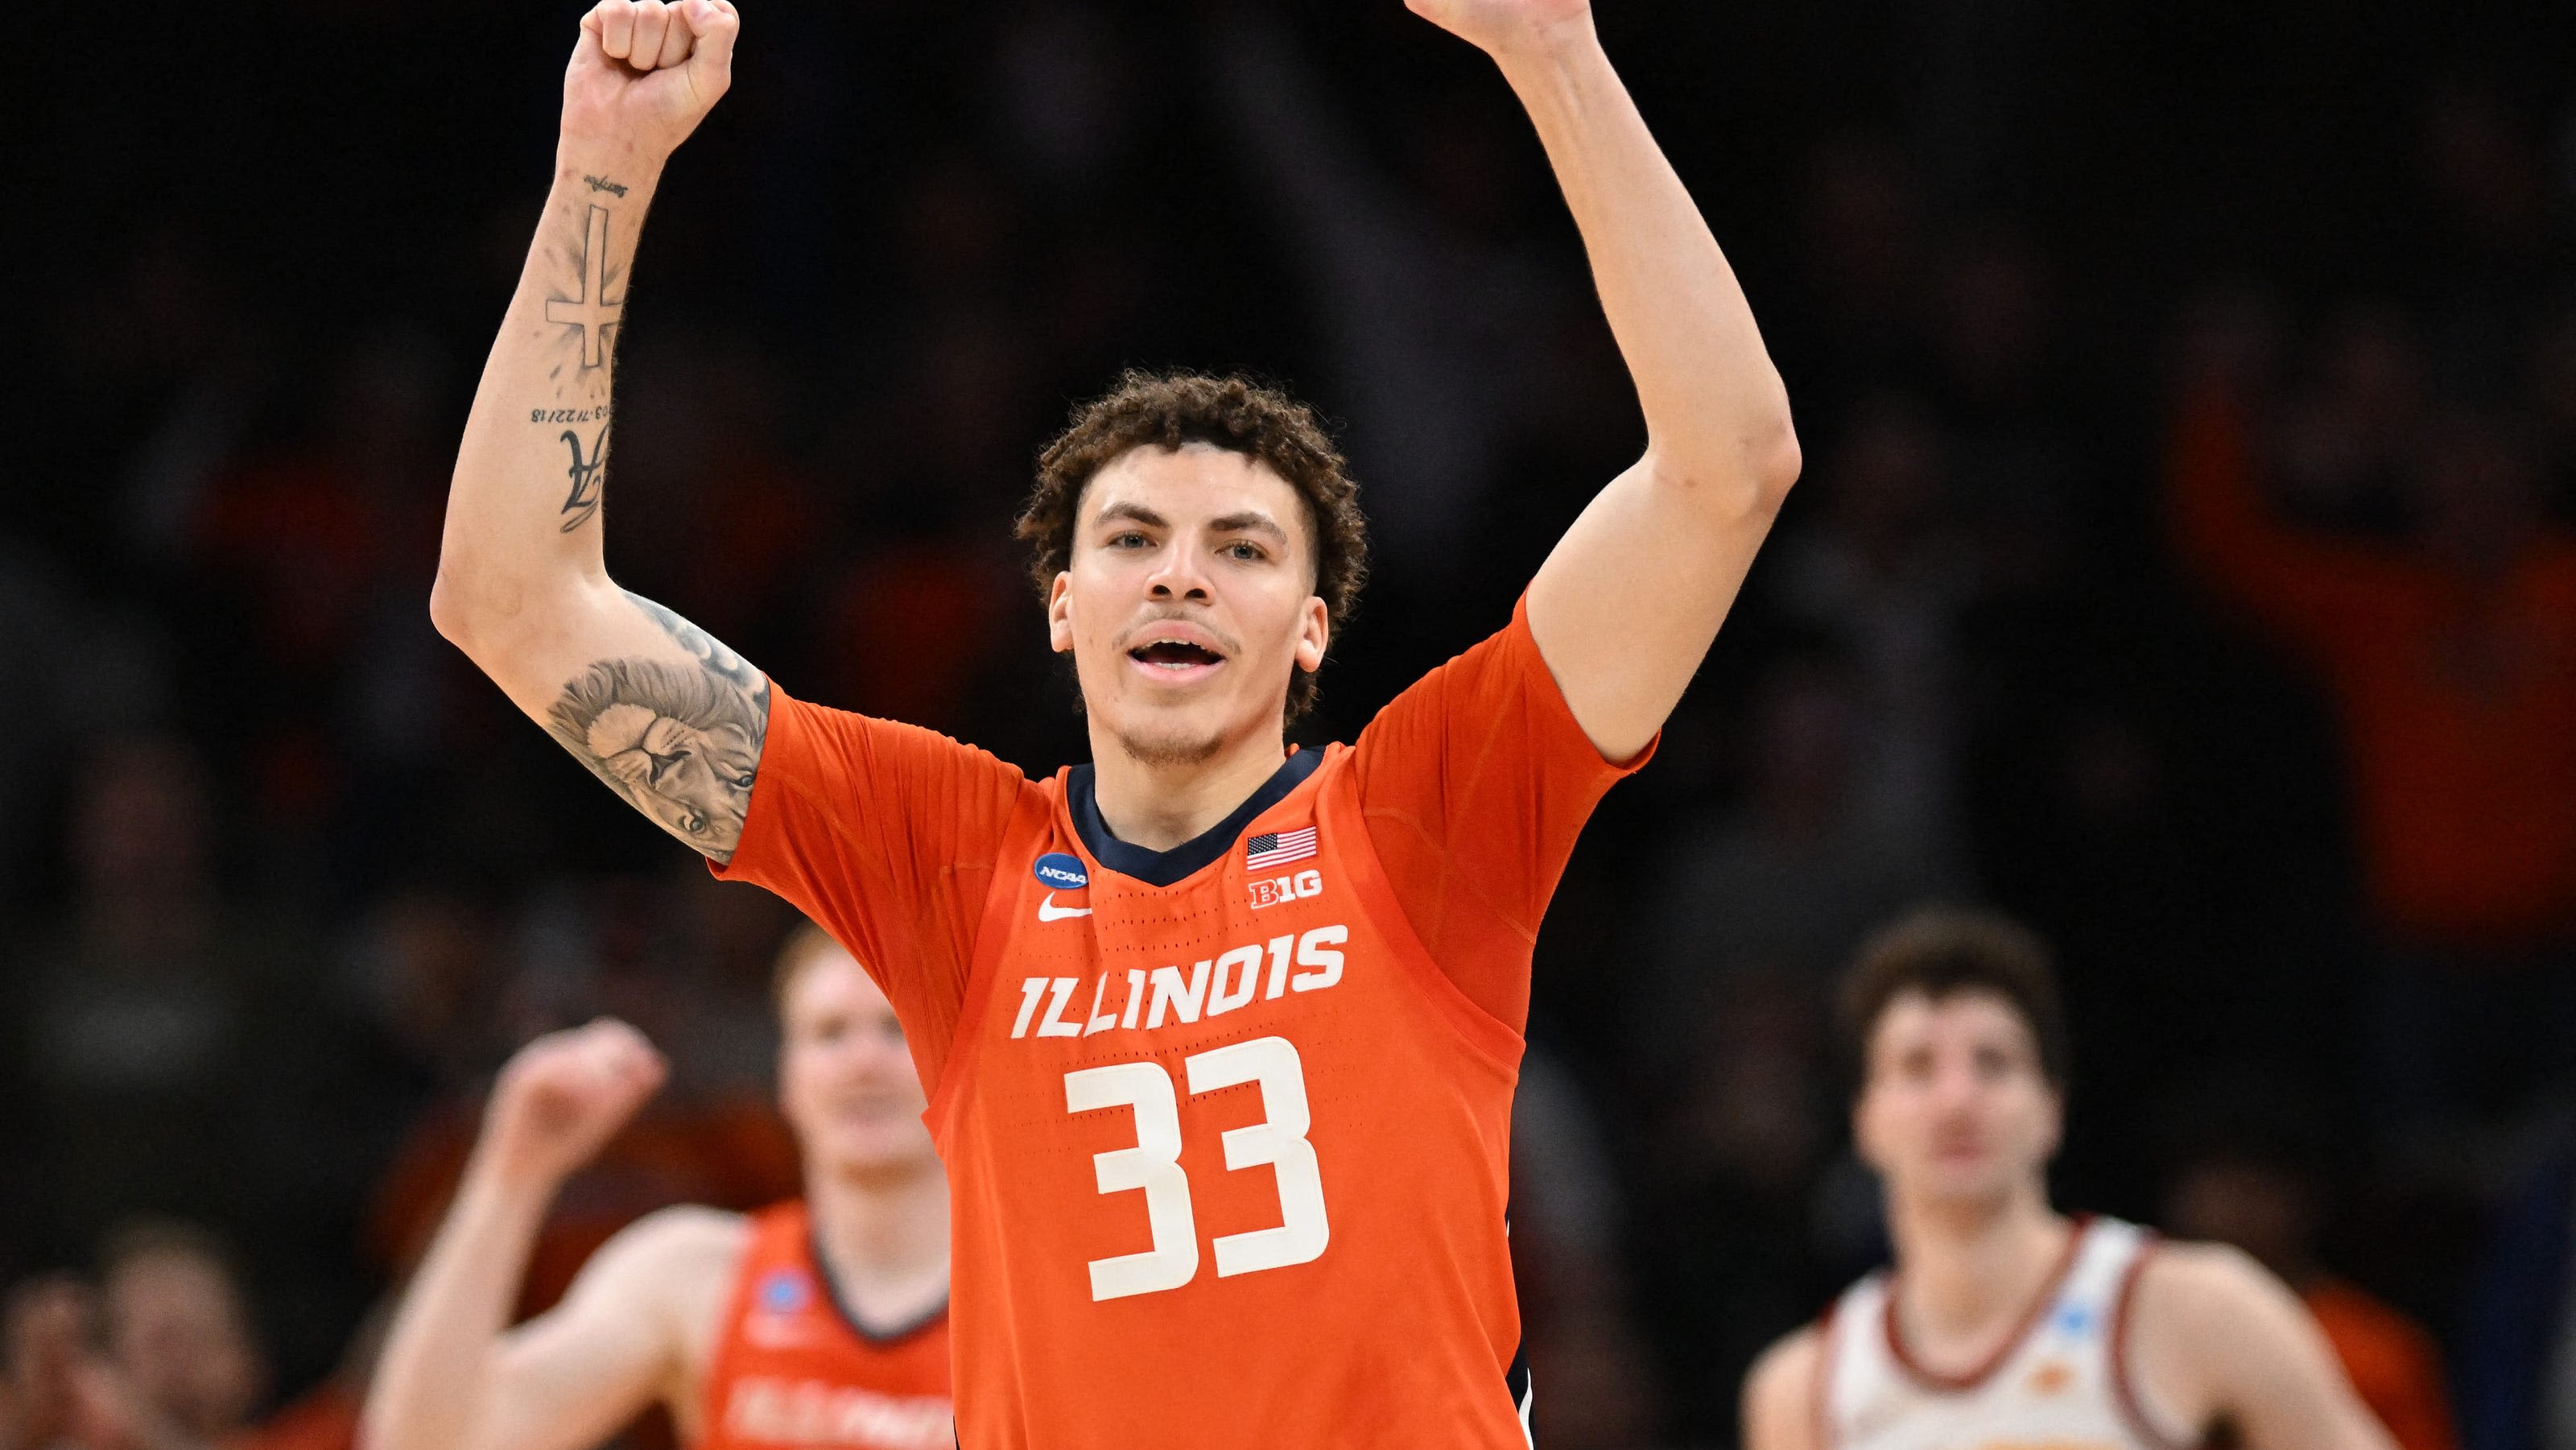 Former Illinois basketball star withdraws from NBA draft, will transfer to another college